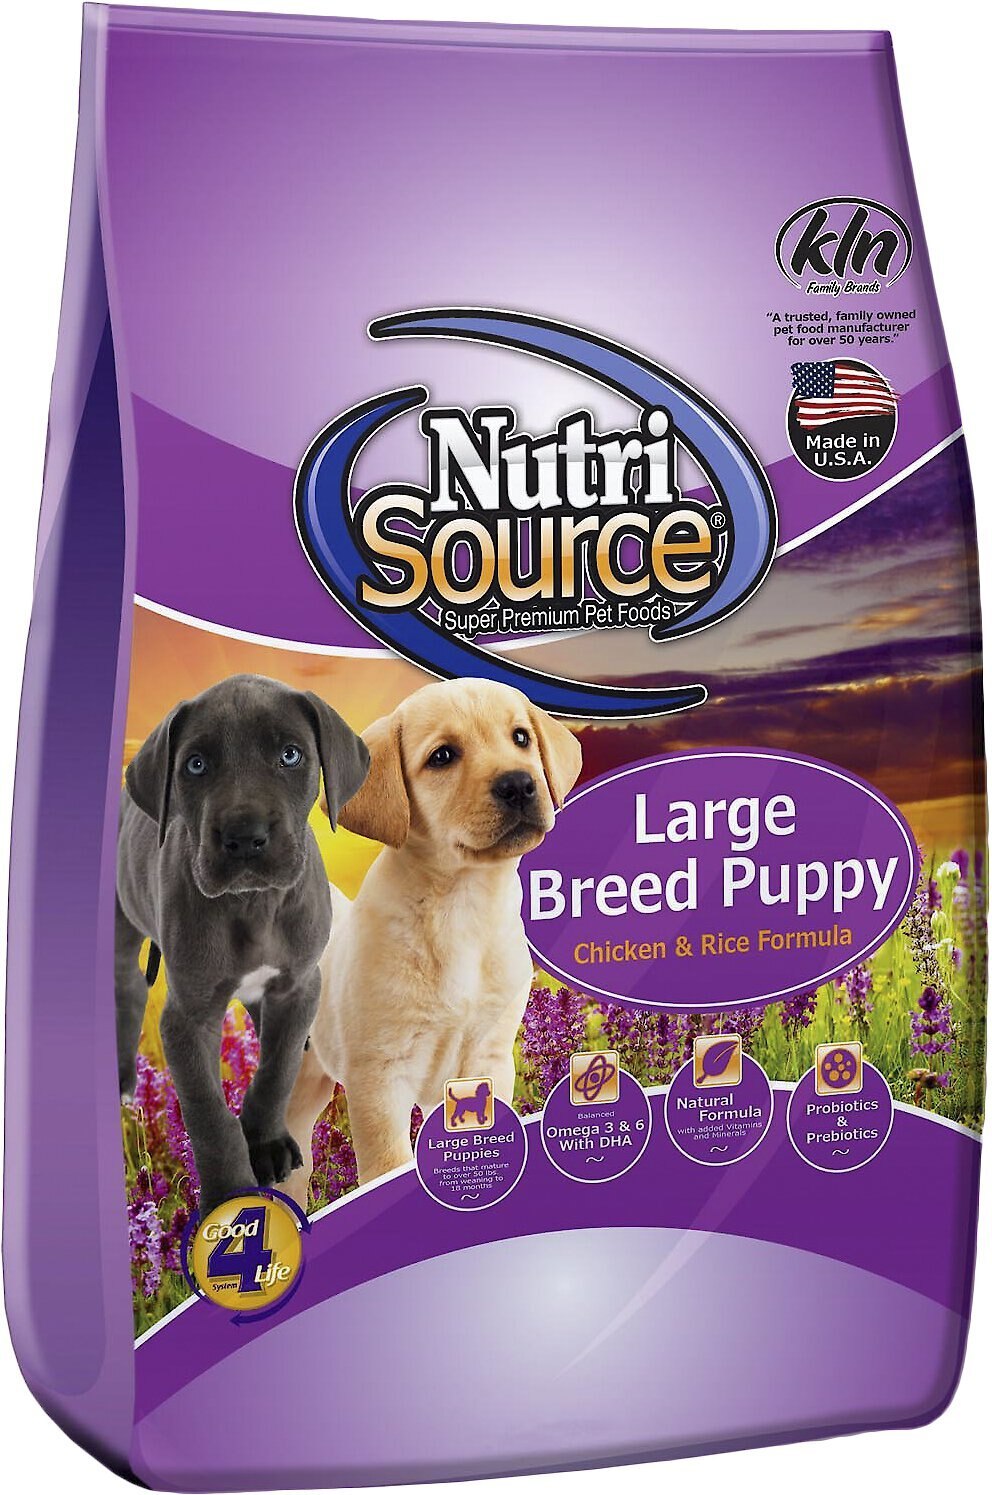 NutriSource Large Breed Puppy Chicken & Rice Formula Dry